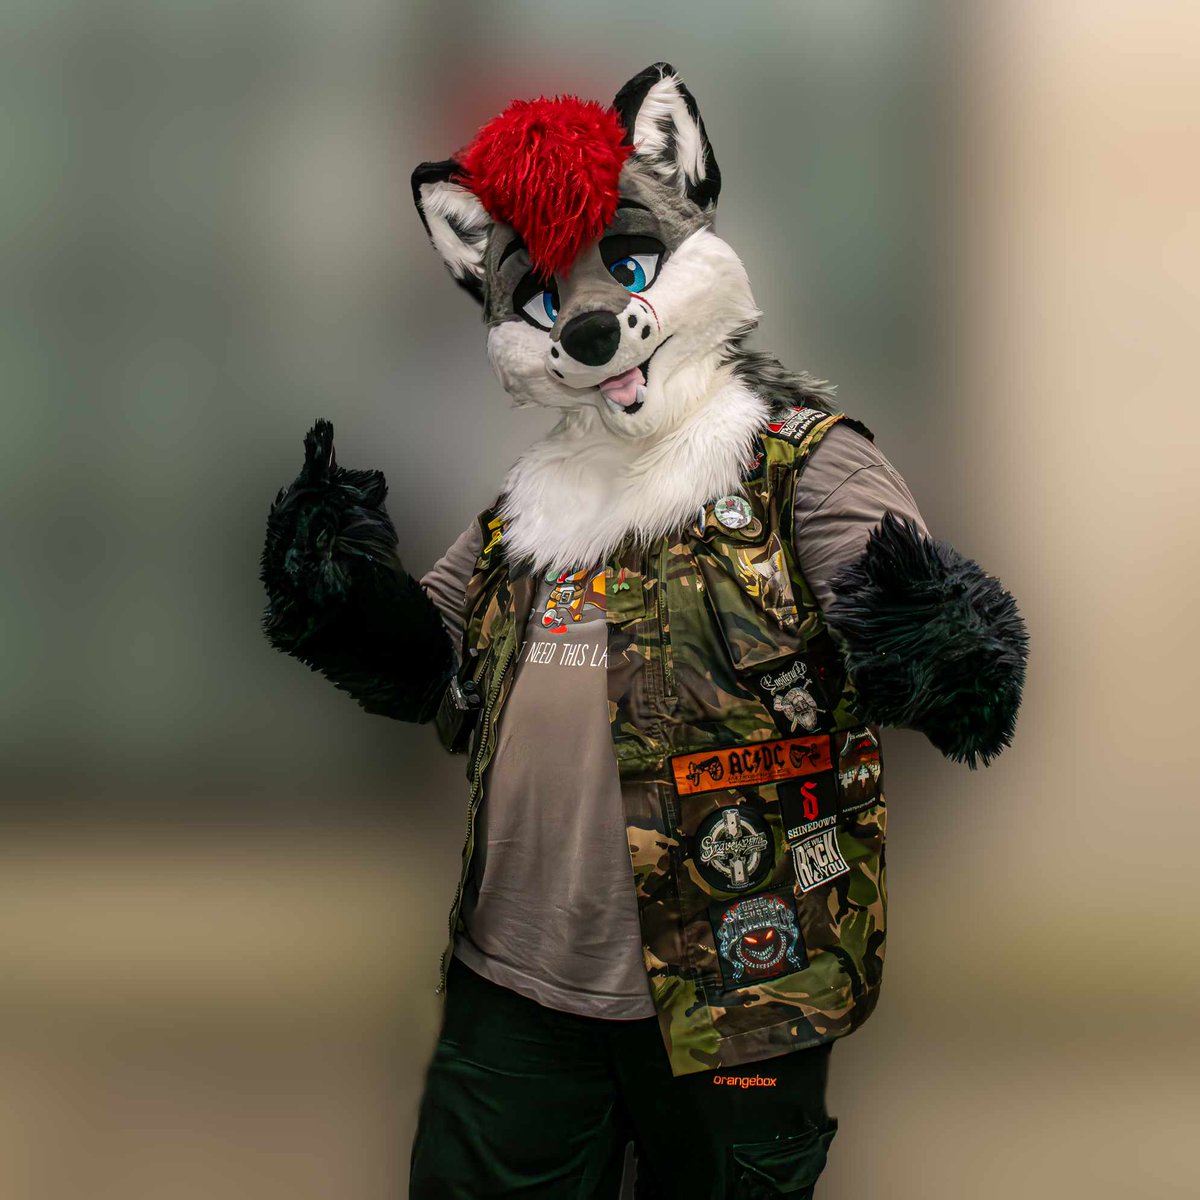 Happy #FursuitFriday y'all!

So this pic was taken as part of a project by the wife of one of our regular attendees, and entered (with 11 others) into an AWPF competition, which they won! ^_^

So I'll be in IRL photo galleries around the world!

🪡: @CCDinoFursuits 
📸: Sam Owens